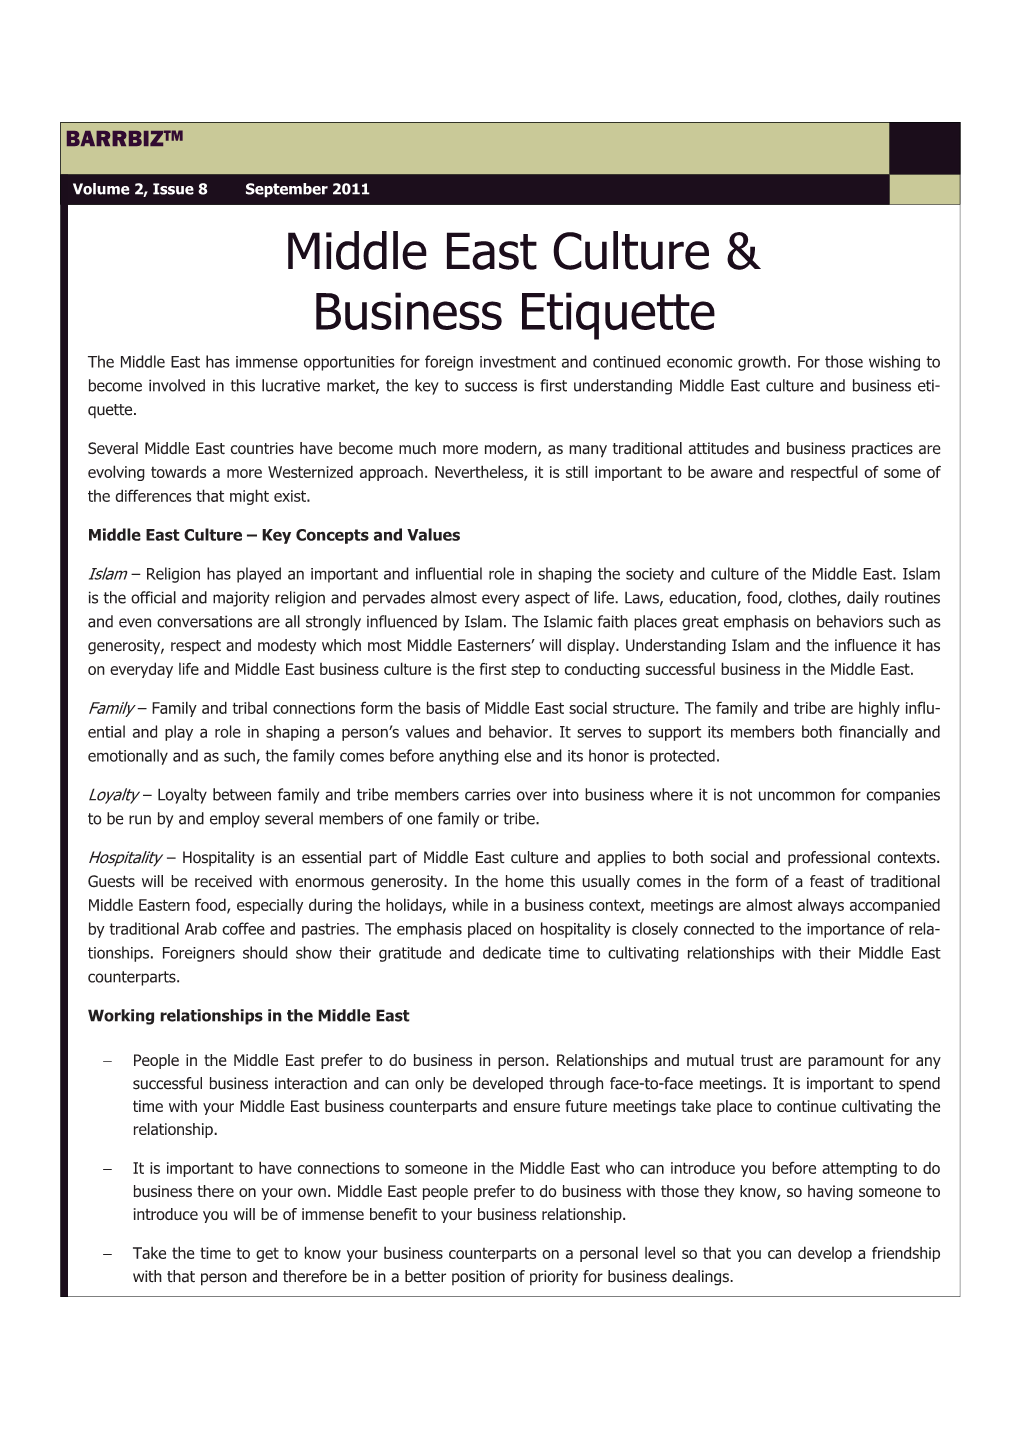 Middle East Culture and Business Etiquette